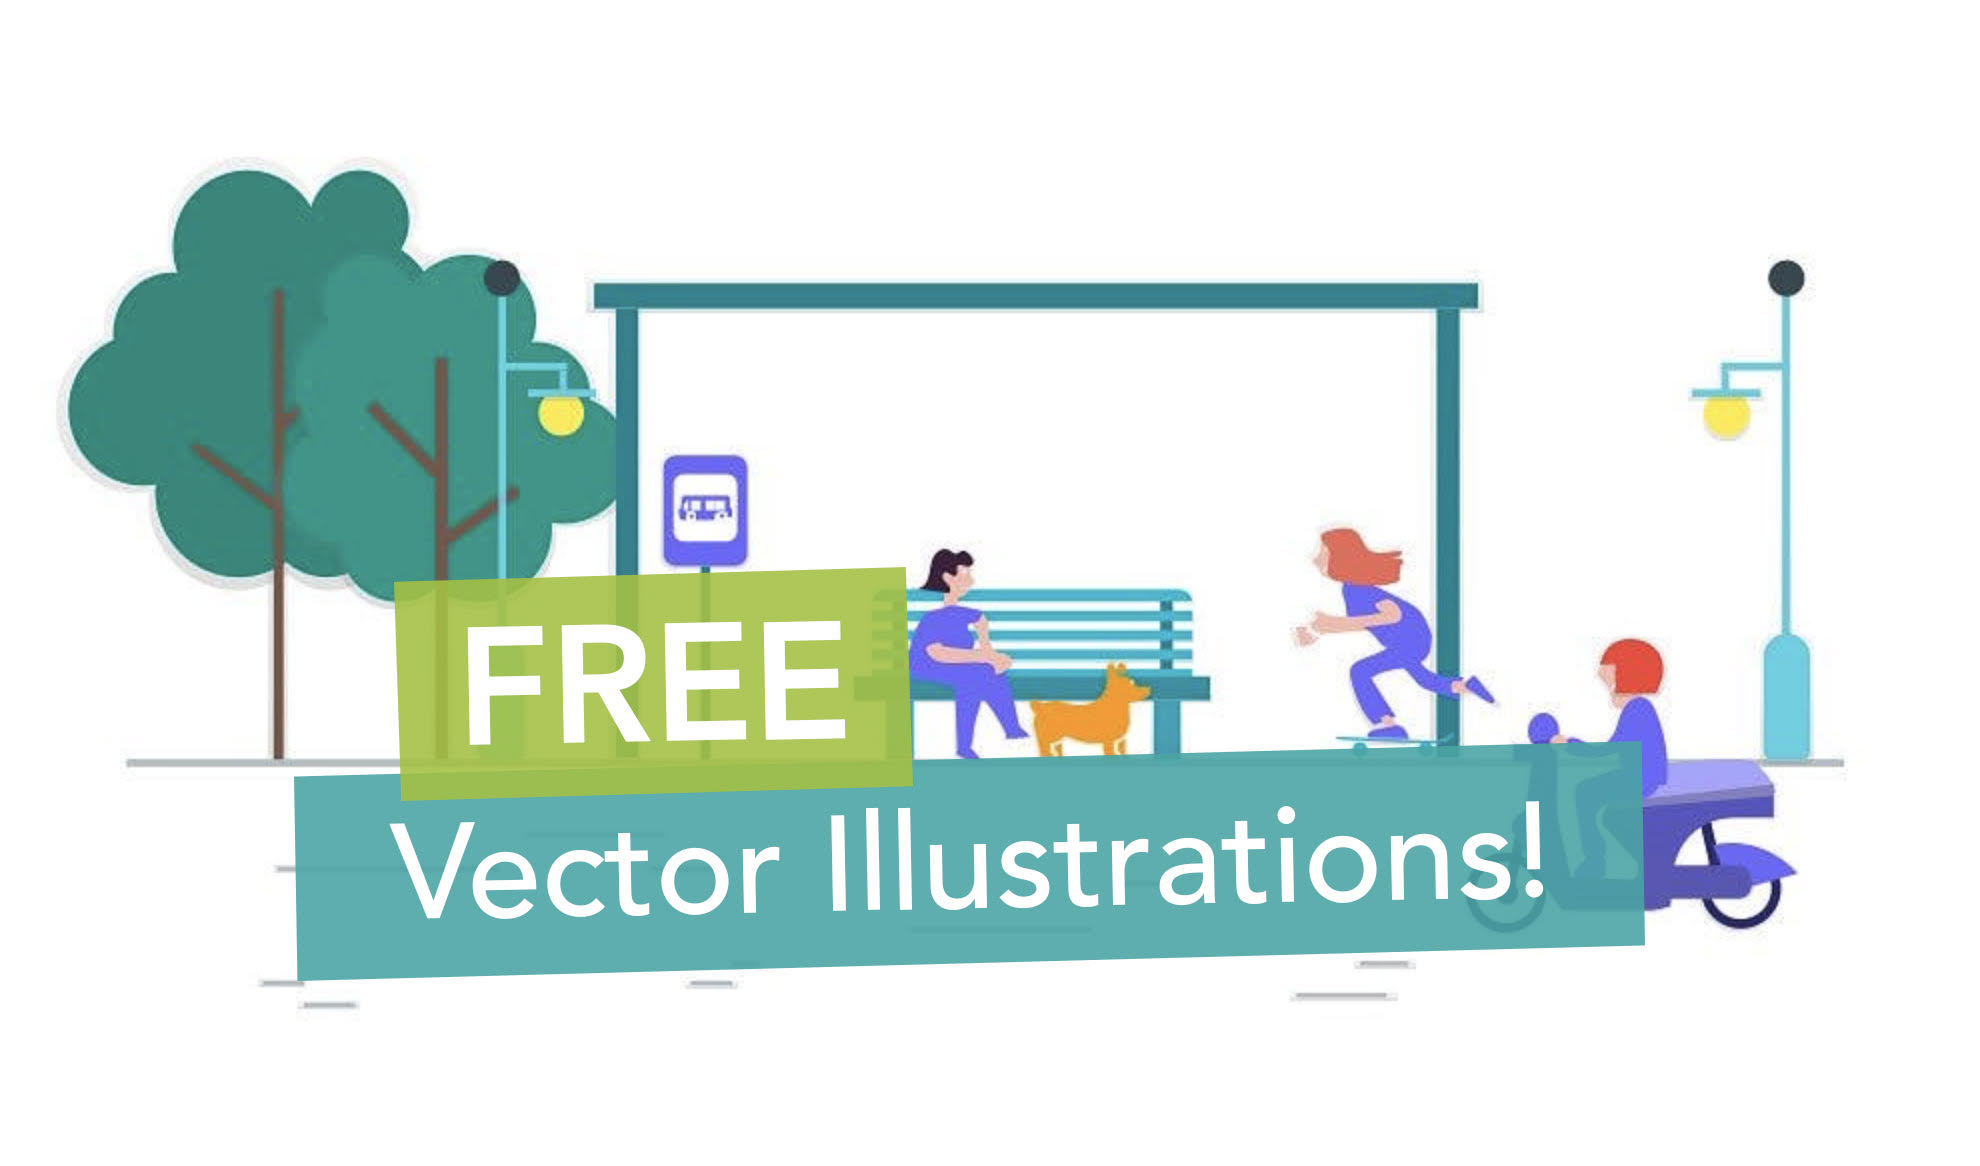 Download Free Vector Stuff! You know you want to look! - KEYLAY Design